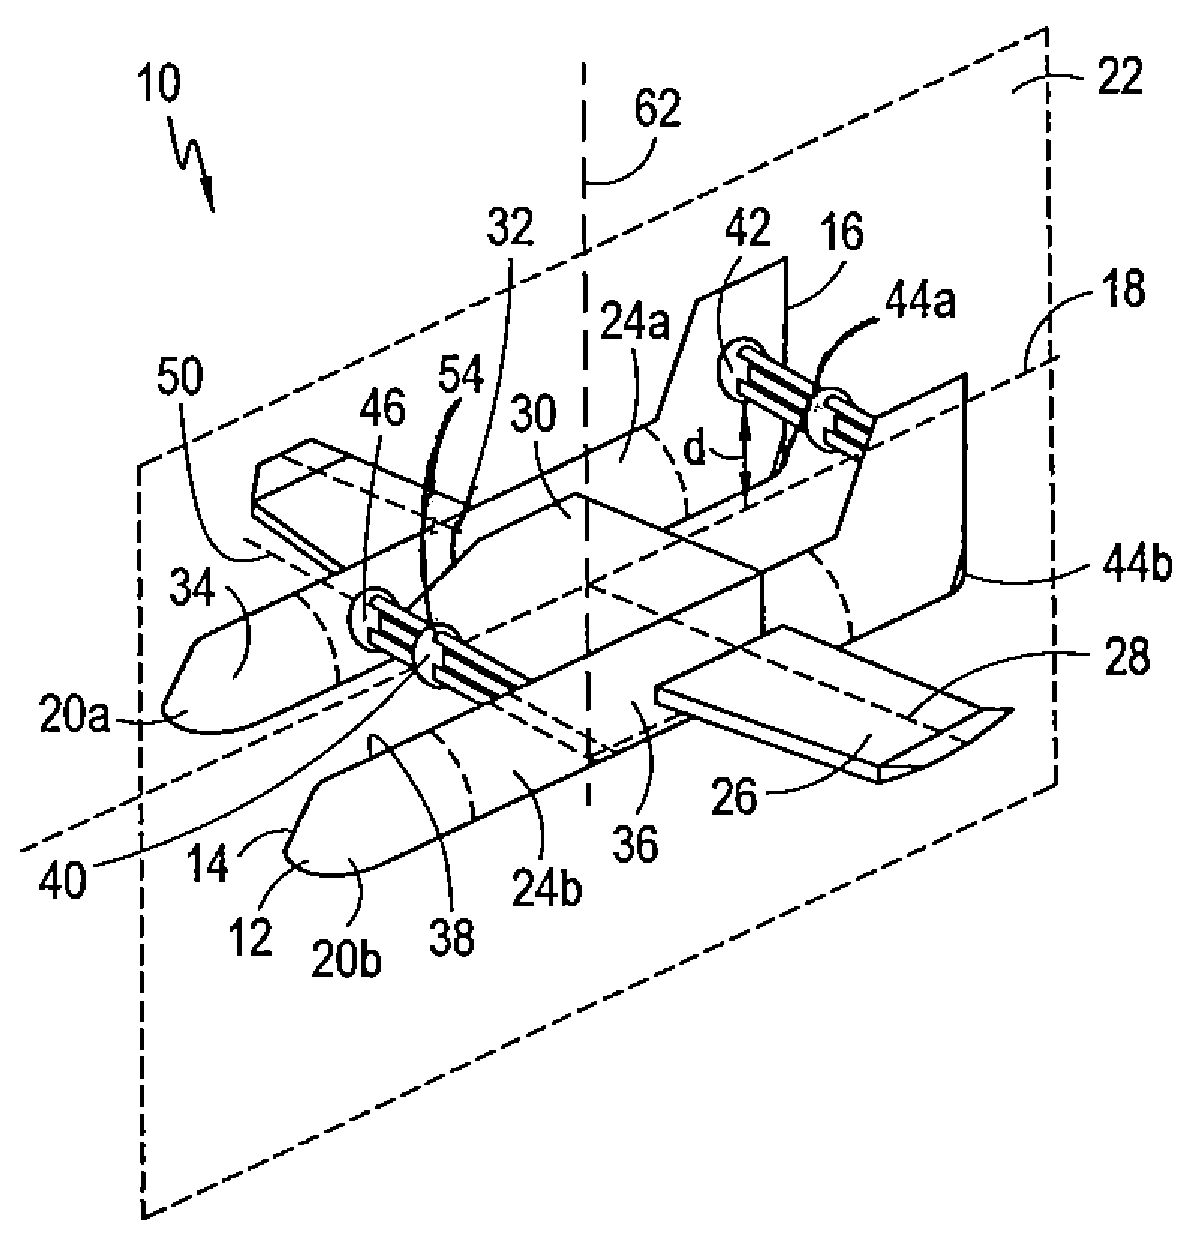 Cycloidal hybrid advanced surface effects vehicle